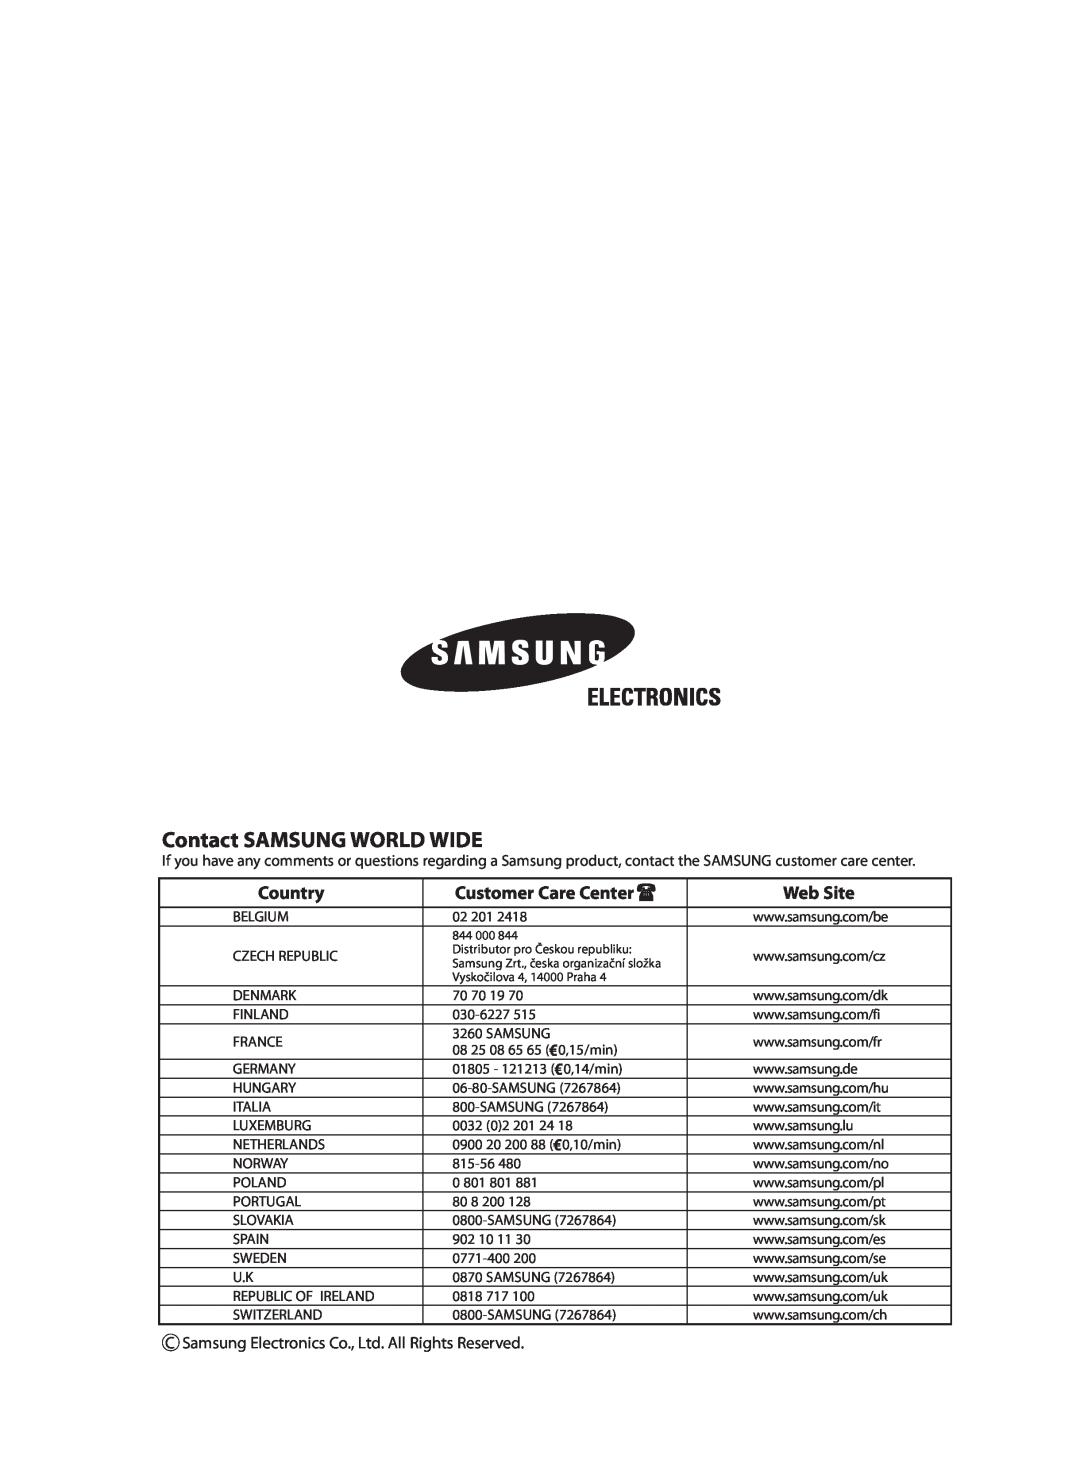 Samsung AS18BPAN, AS09BPAN, AS24BPAX, AS24BPAN, AS12BPAN Contact SAMSUNG WORLD WIDE, Country, Customer Care Center, Web Site 